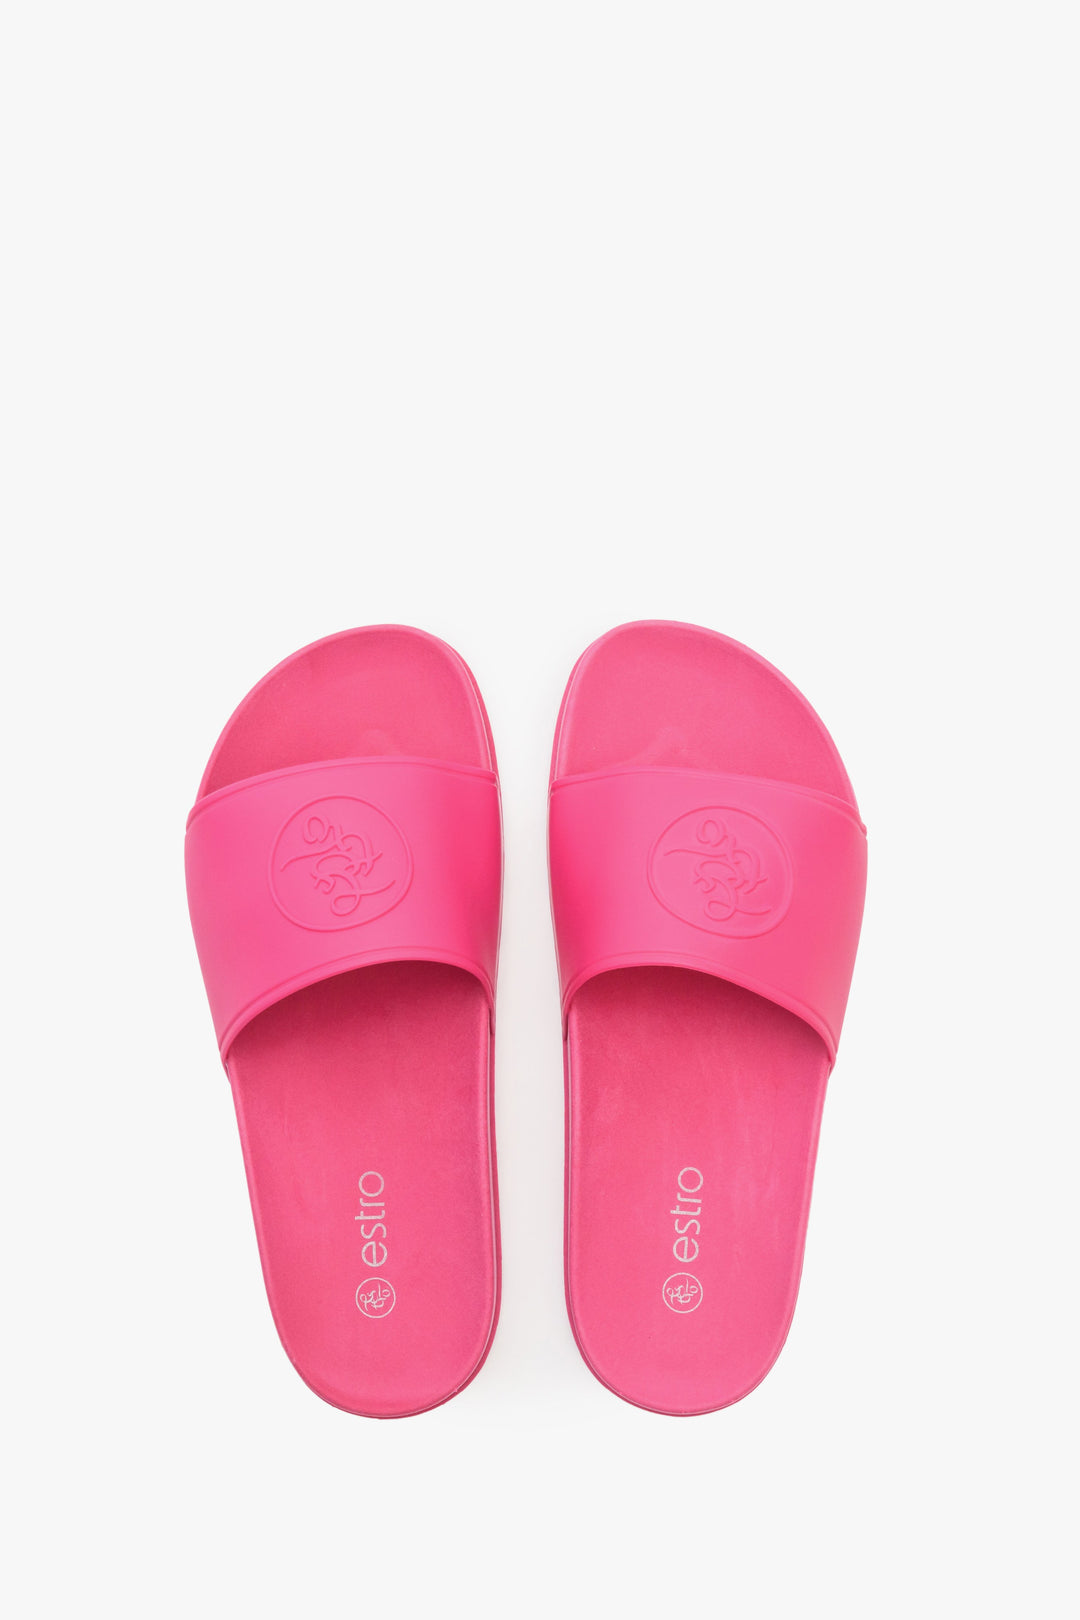 Women's pink Estro rubber pool slides - presentation of the footwear from above.